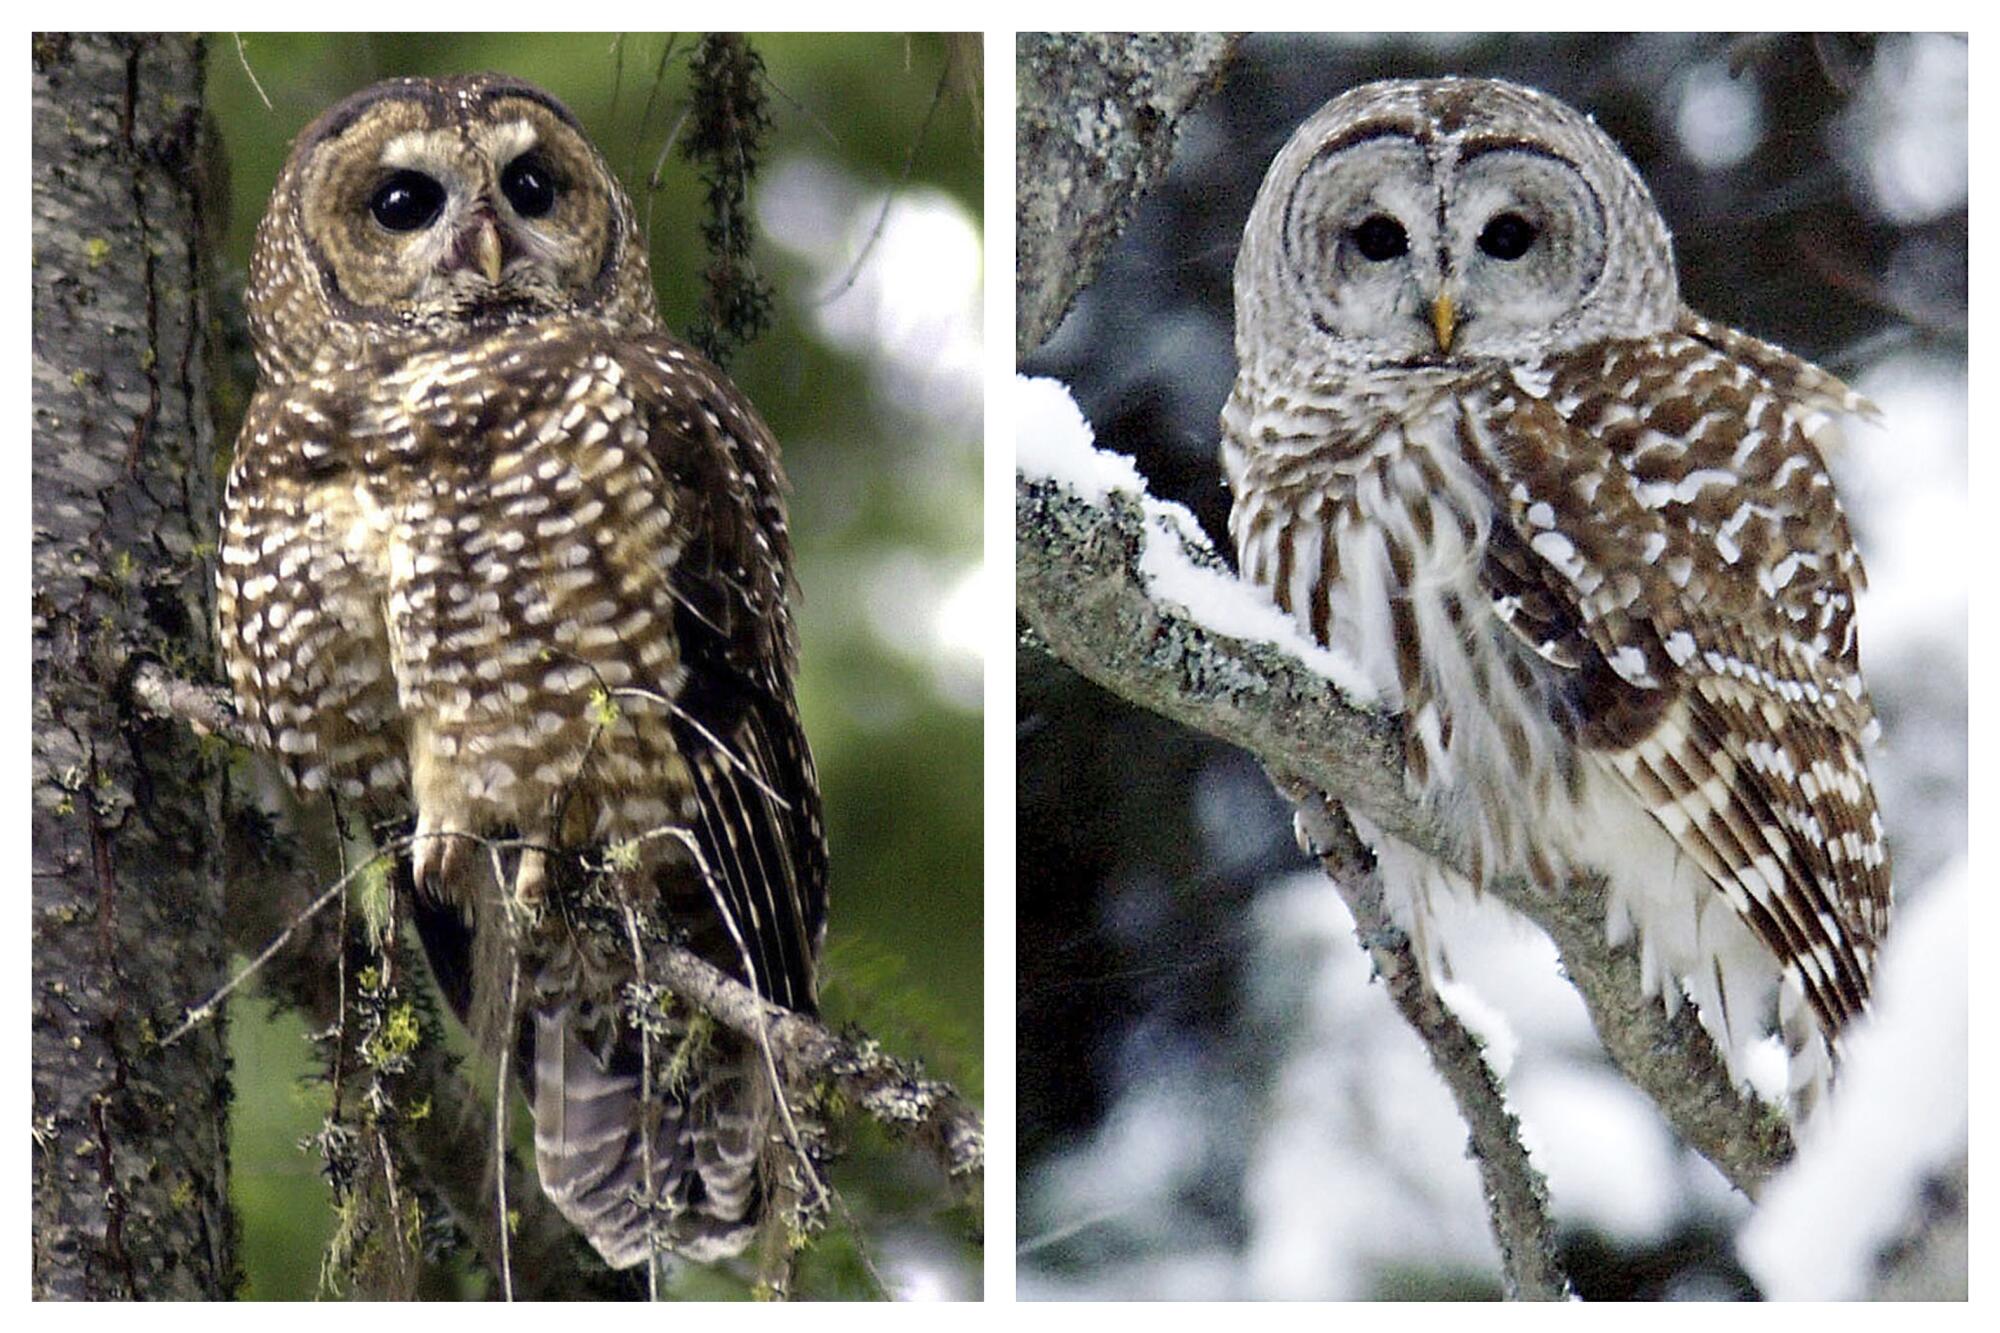 A northern spotted owl, left, and a barred owl, right.